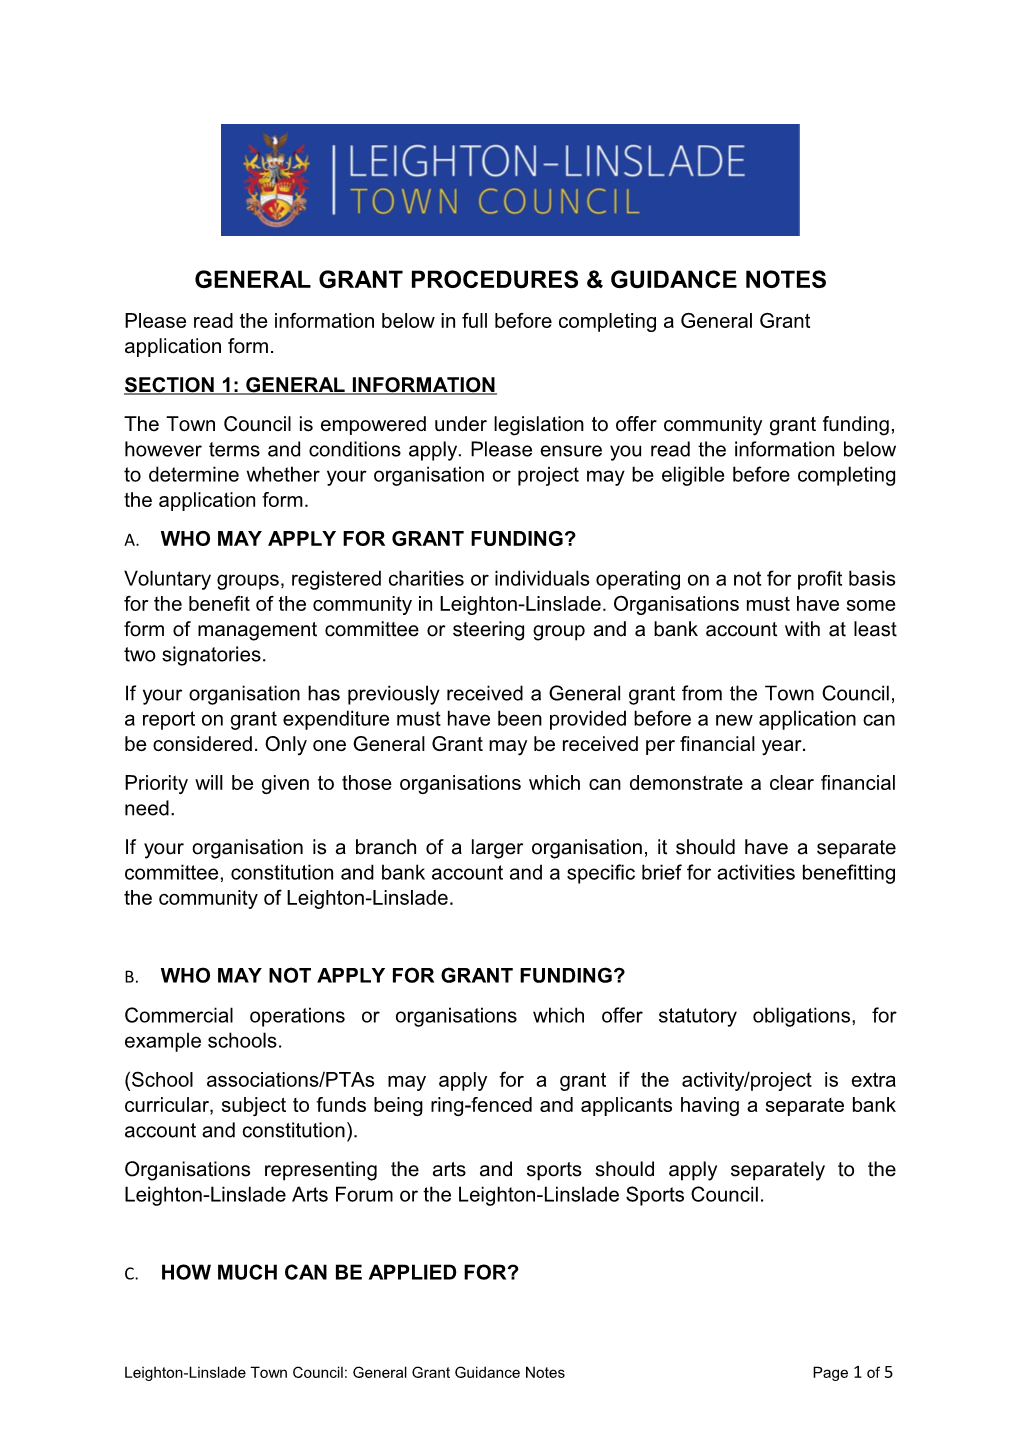 General Grant Procedures & Guidance Notes